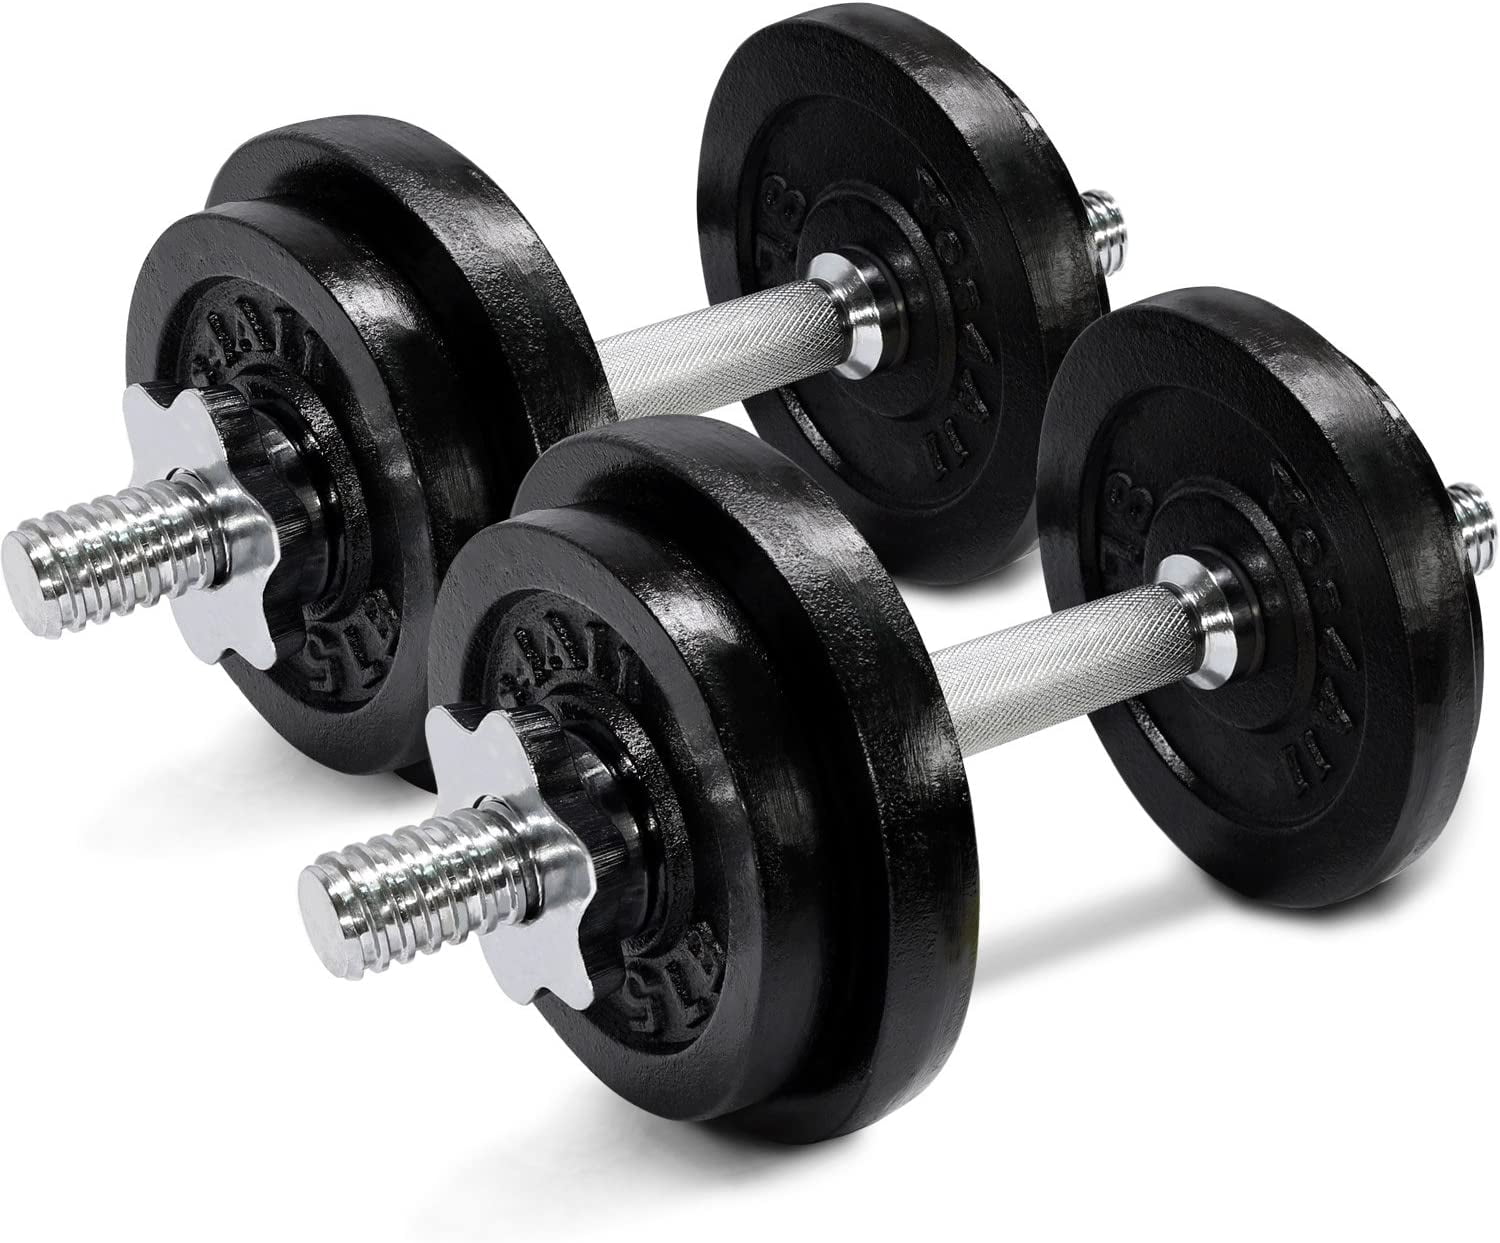 NEW CAP 40 Lb Total Adjustable Cast Iron Dumbbell Weight Set Free SHIPPING 